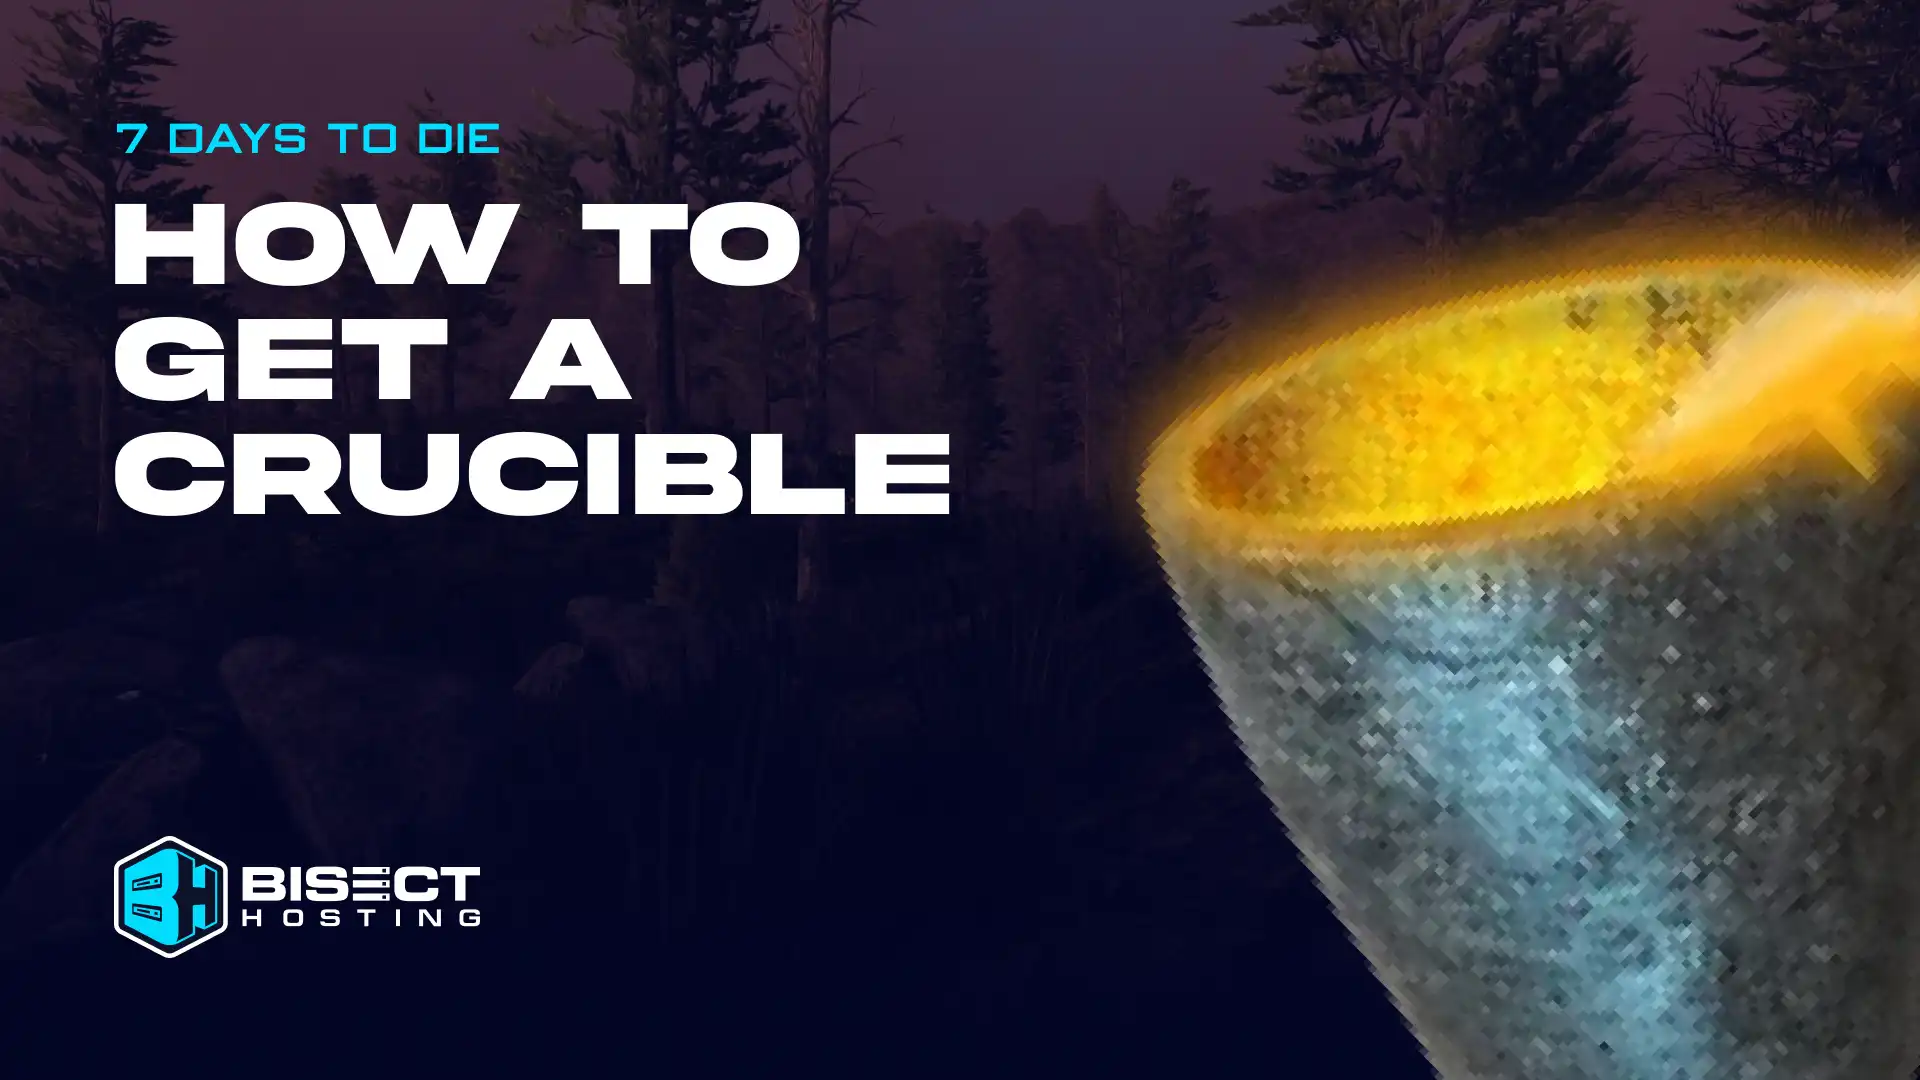 How to Get the Crucible in 7 Days to Die